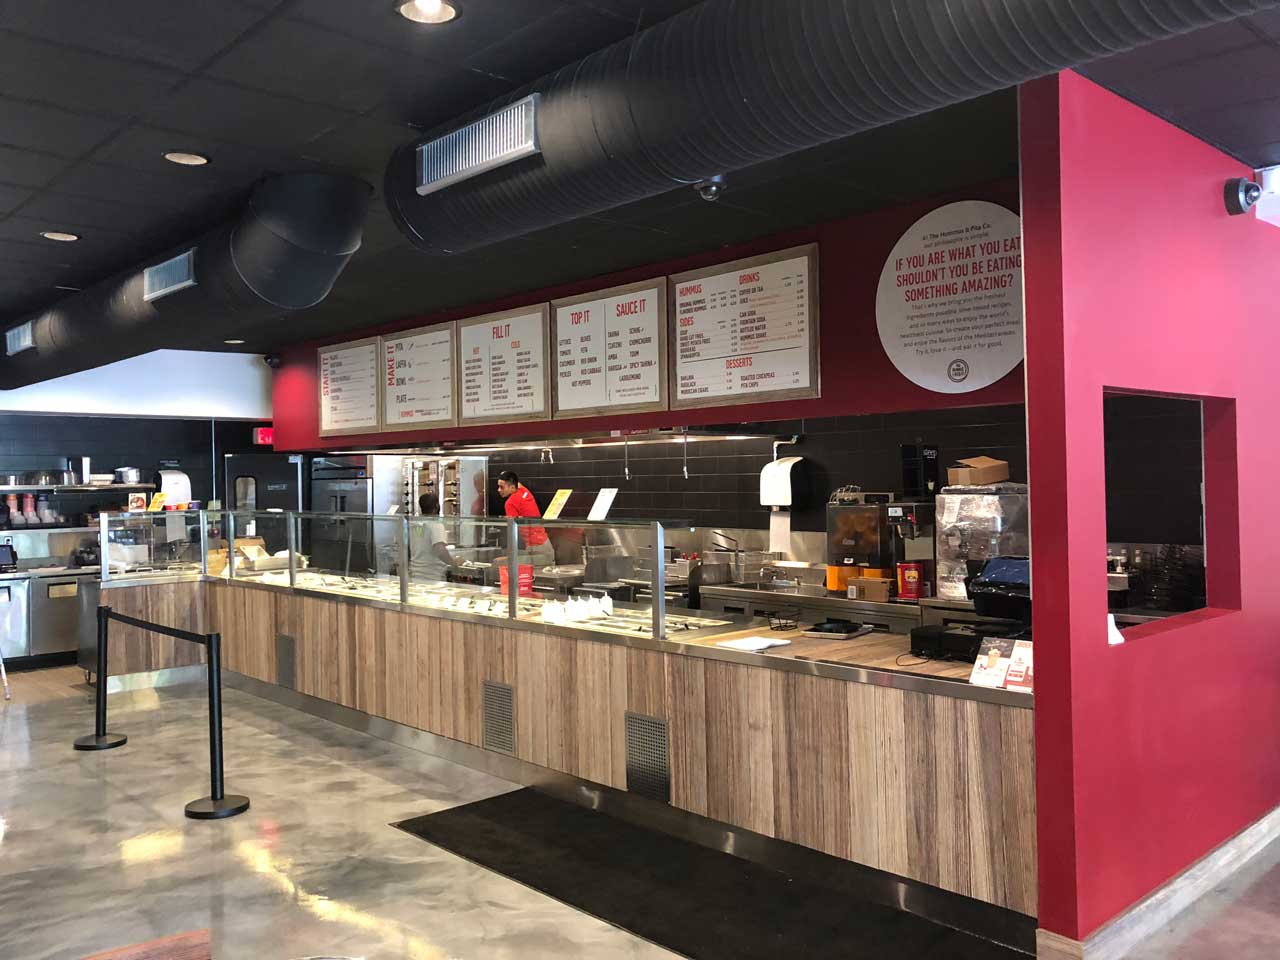 Hummus & Pita Co. Opening Bell Works Holmdel New Jersey